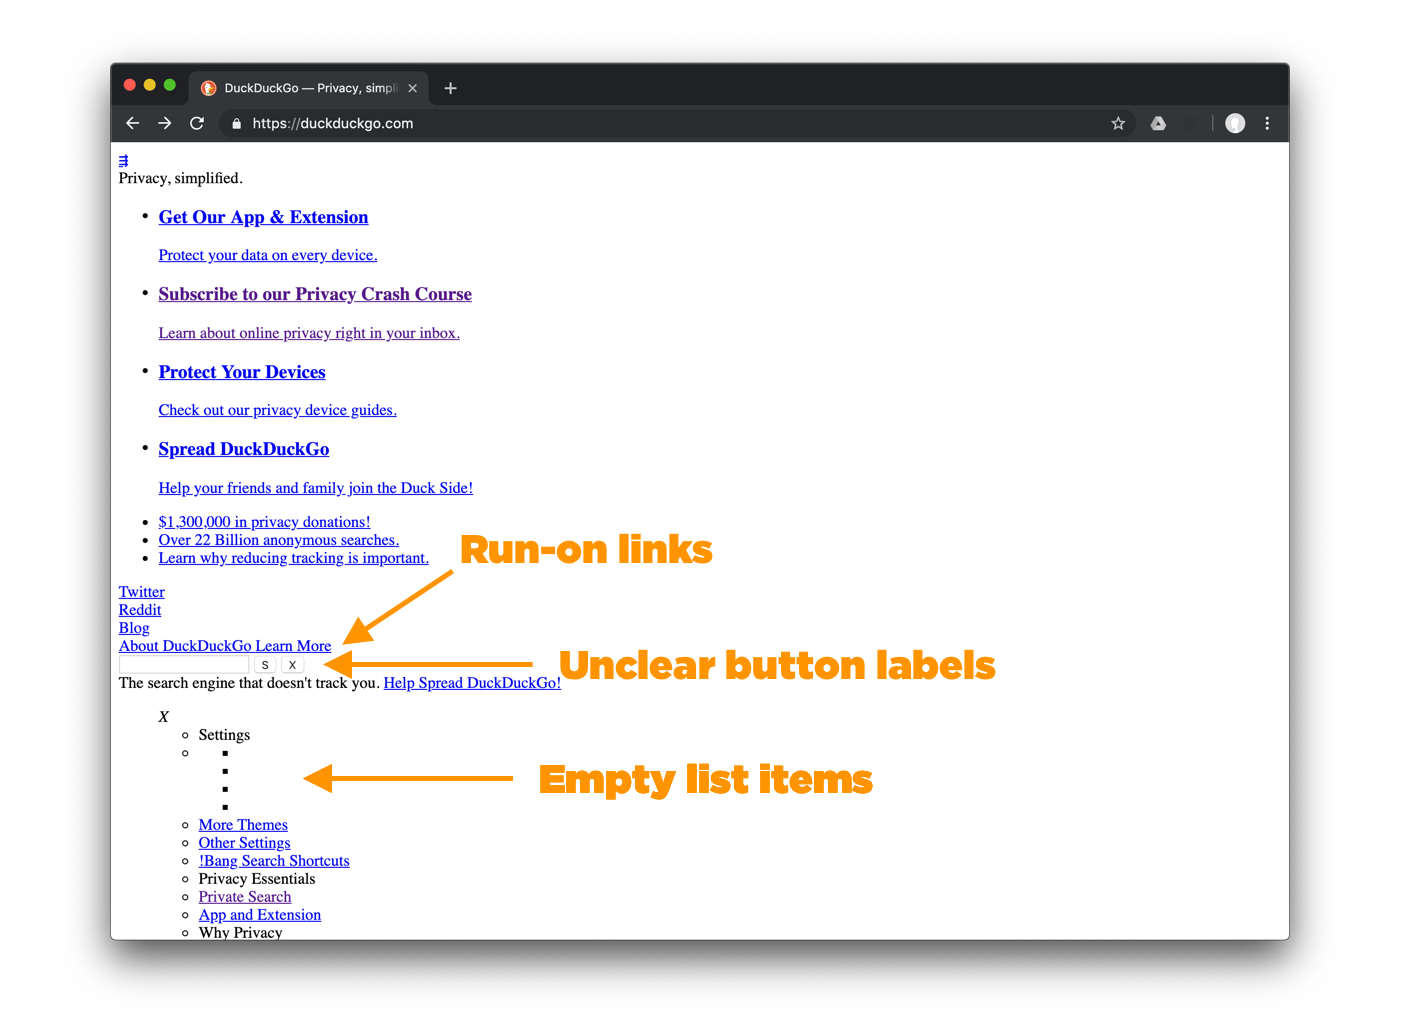 Orange arrows pointing to run-on links, unclear button labels, and empty list items